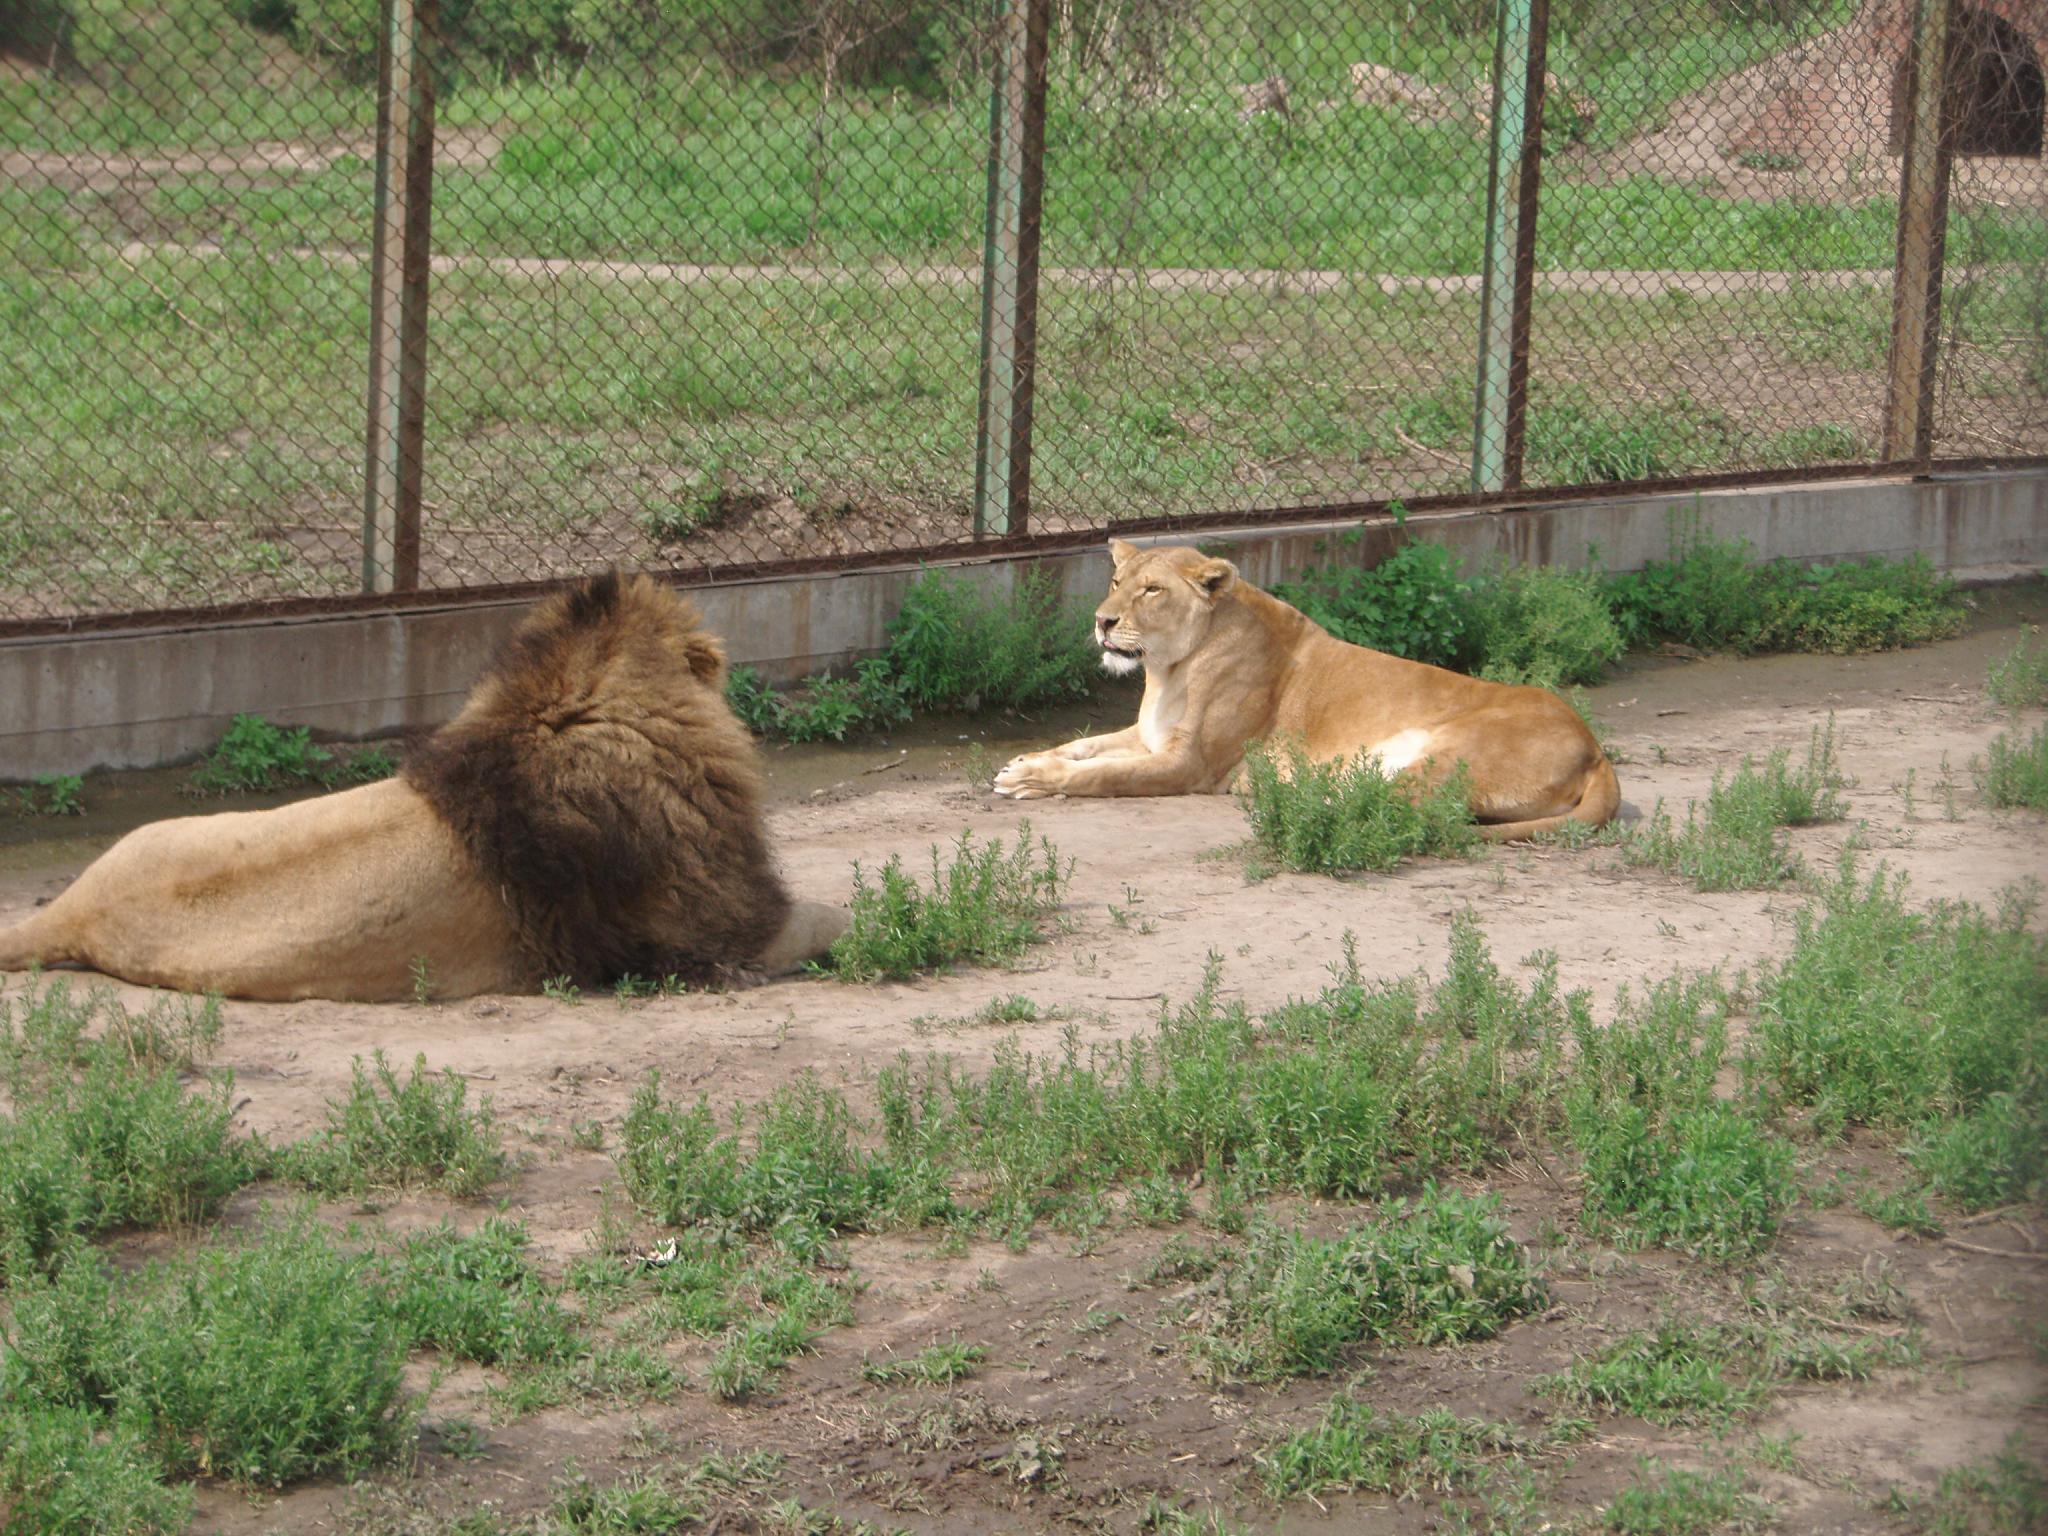 a group of lions sit in an enclosure with grass